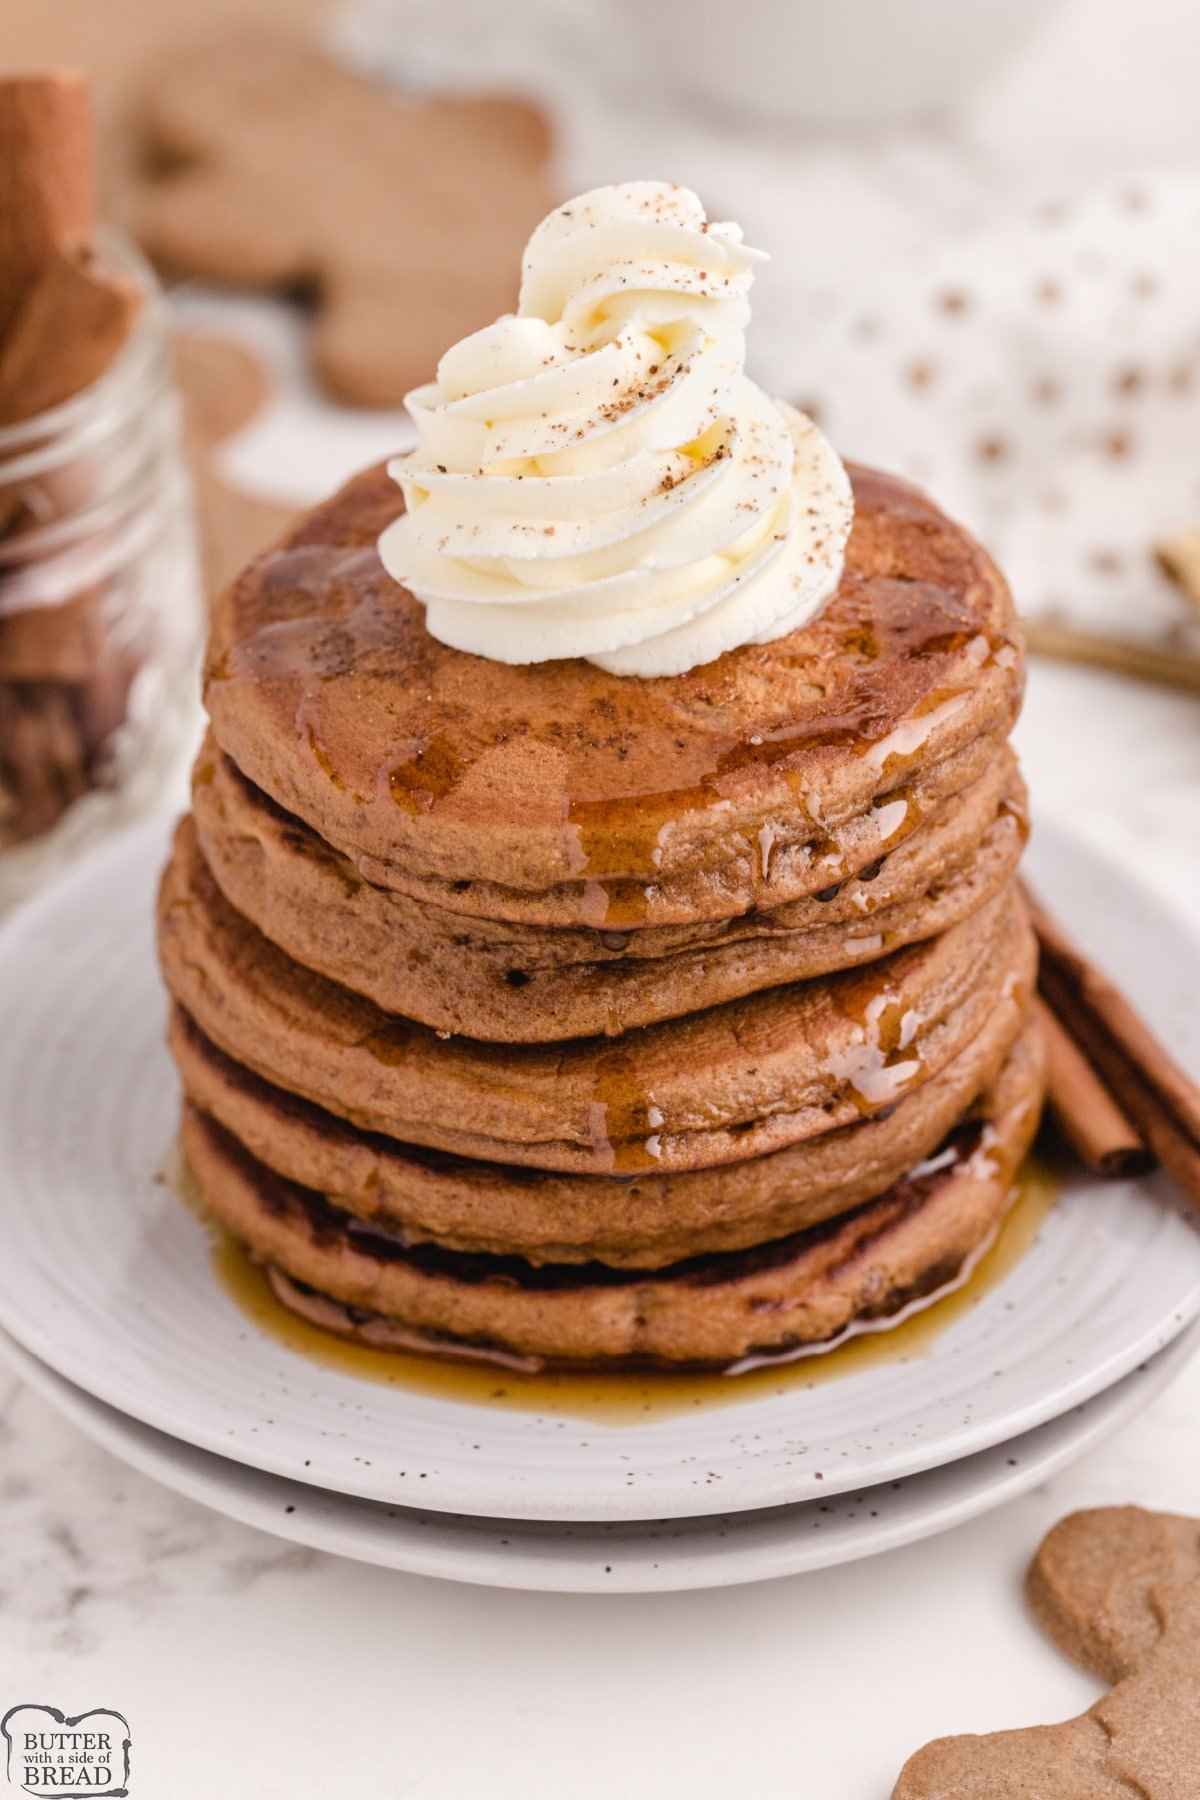 Gingerbread Pancakes made from scratch with cinnamon, cloves and molasses for the perfect gingerbread flavor. Light and fluffy gingerbread pancake recipe that turns out perfectly every time! 